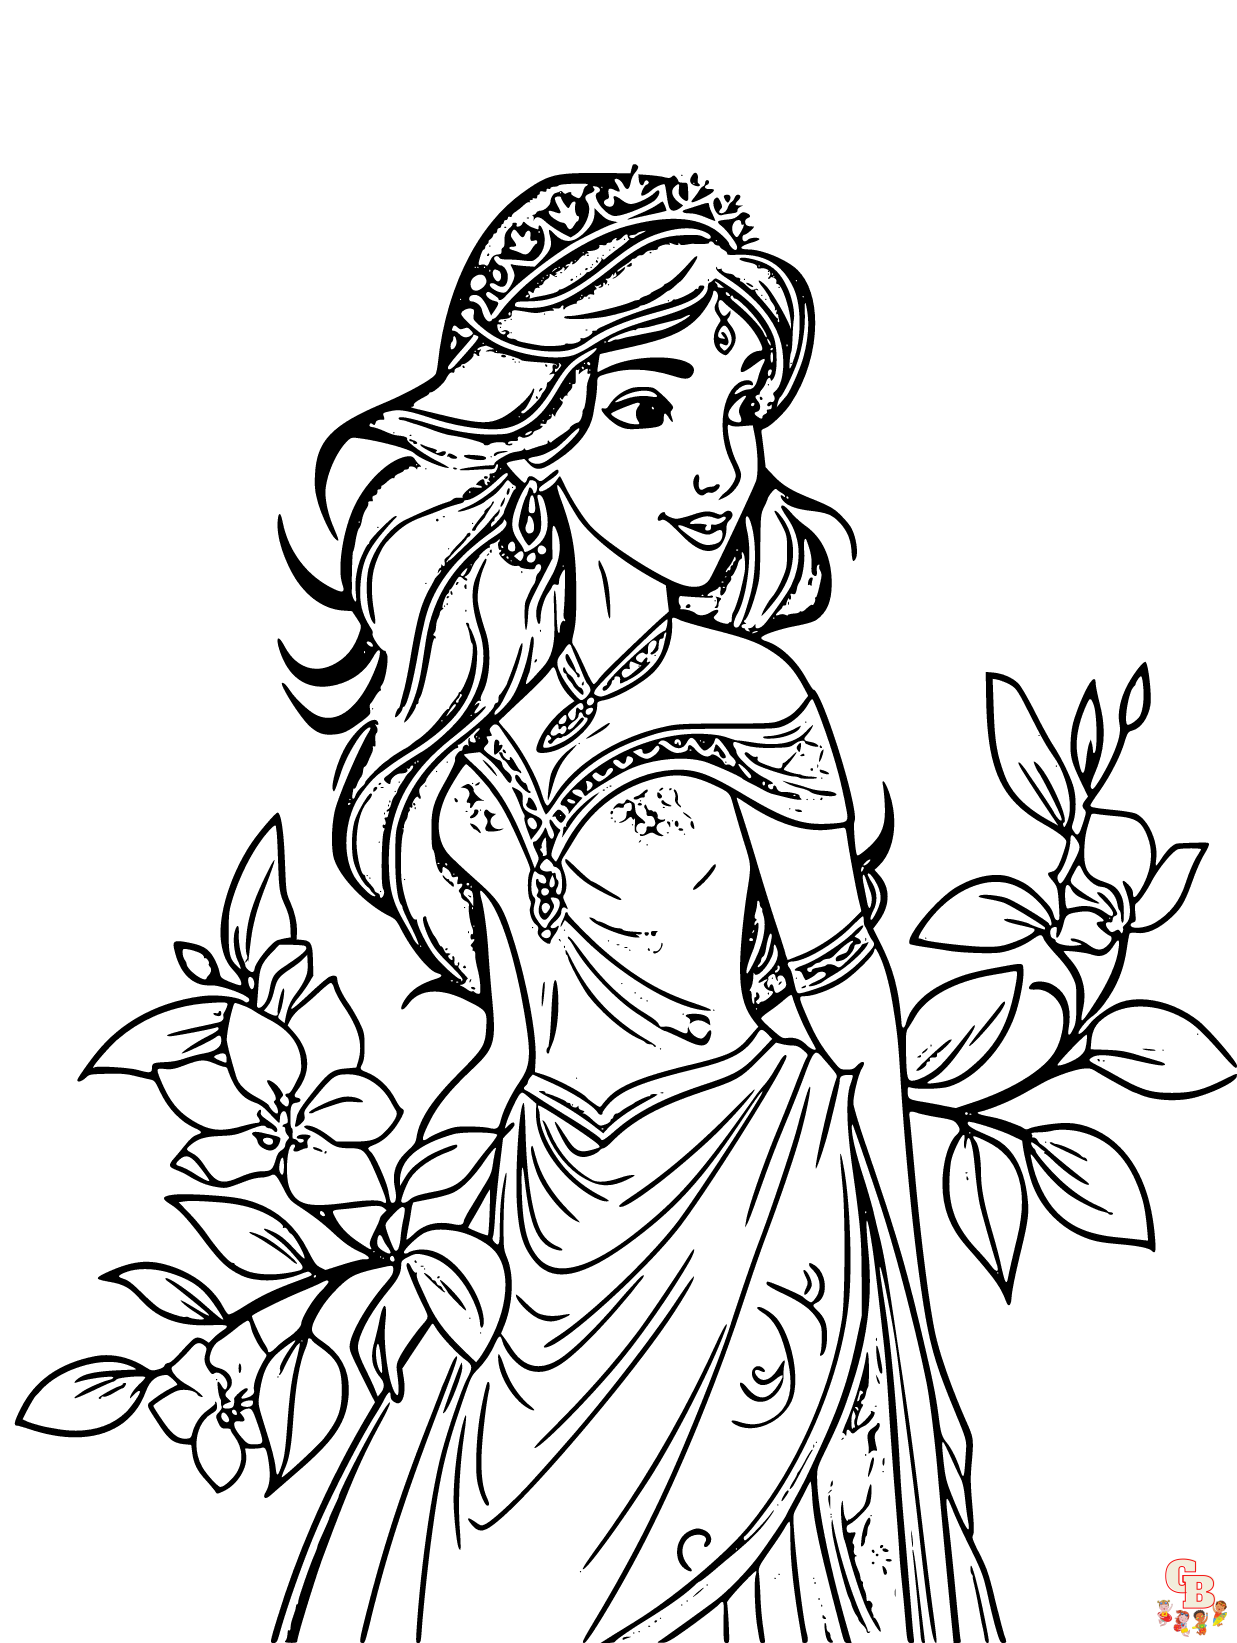 Free Jasmine coloring pages for kids